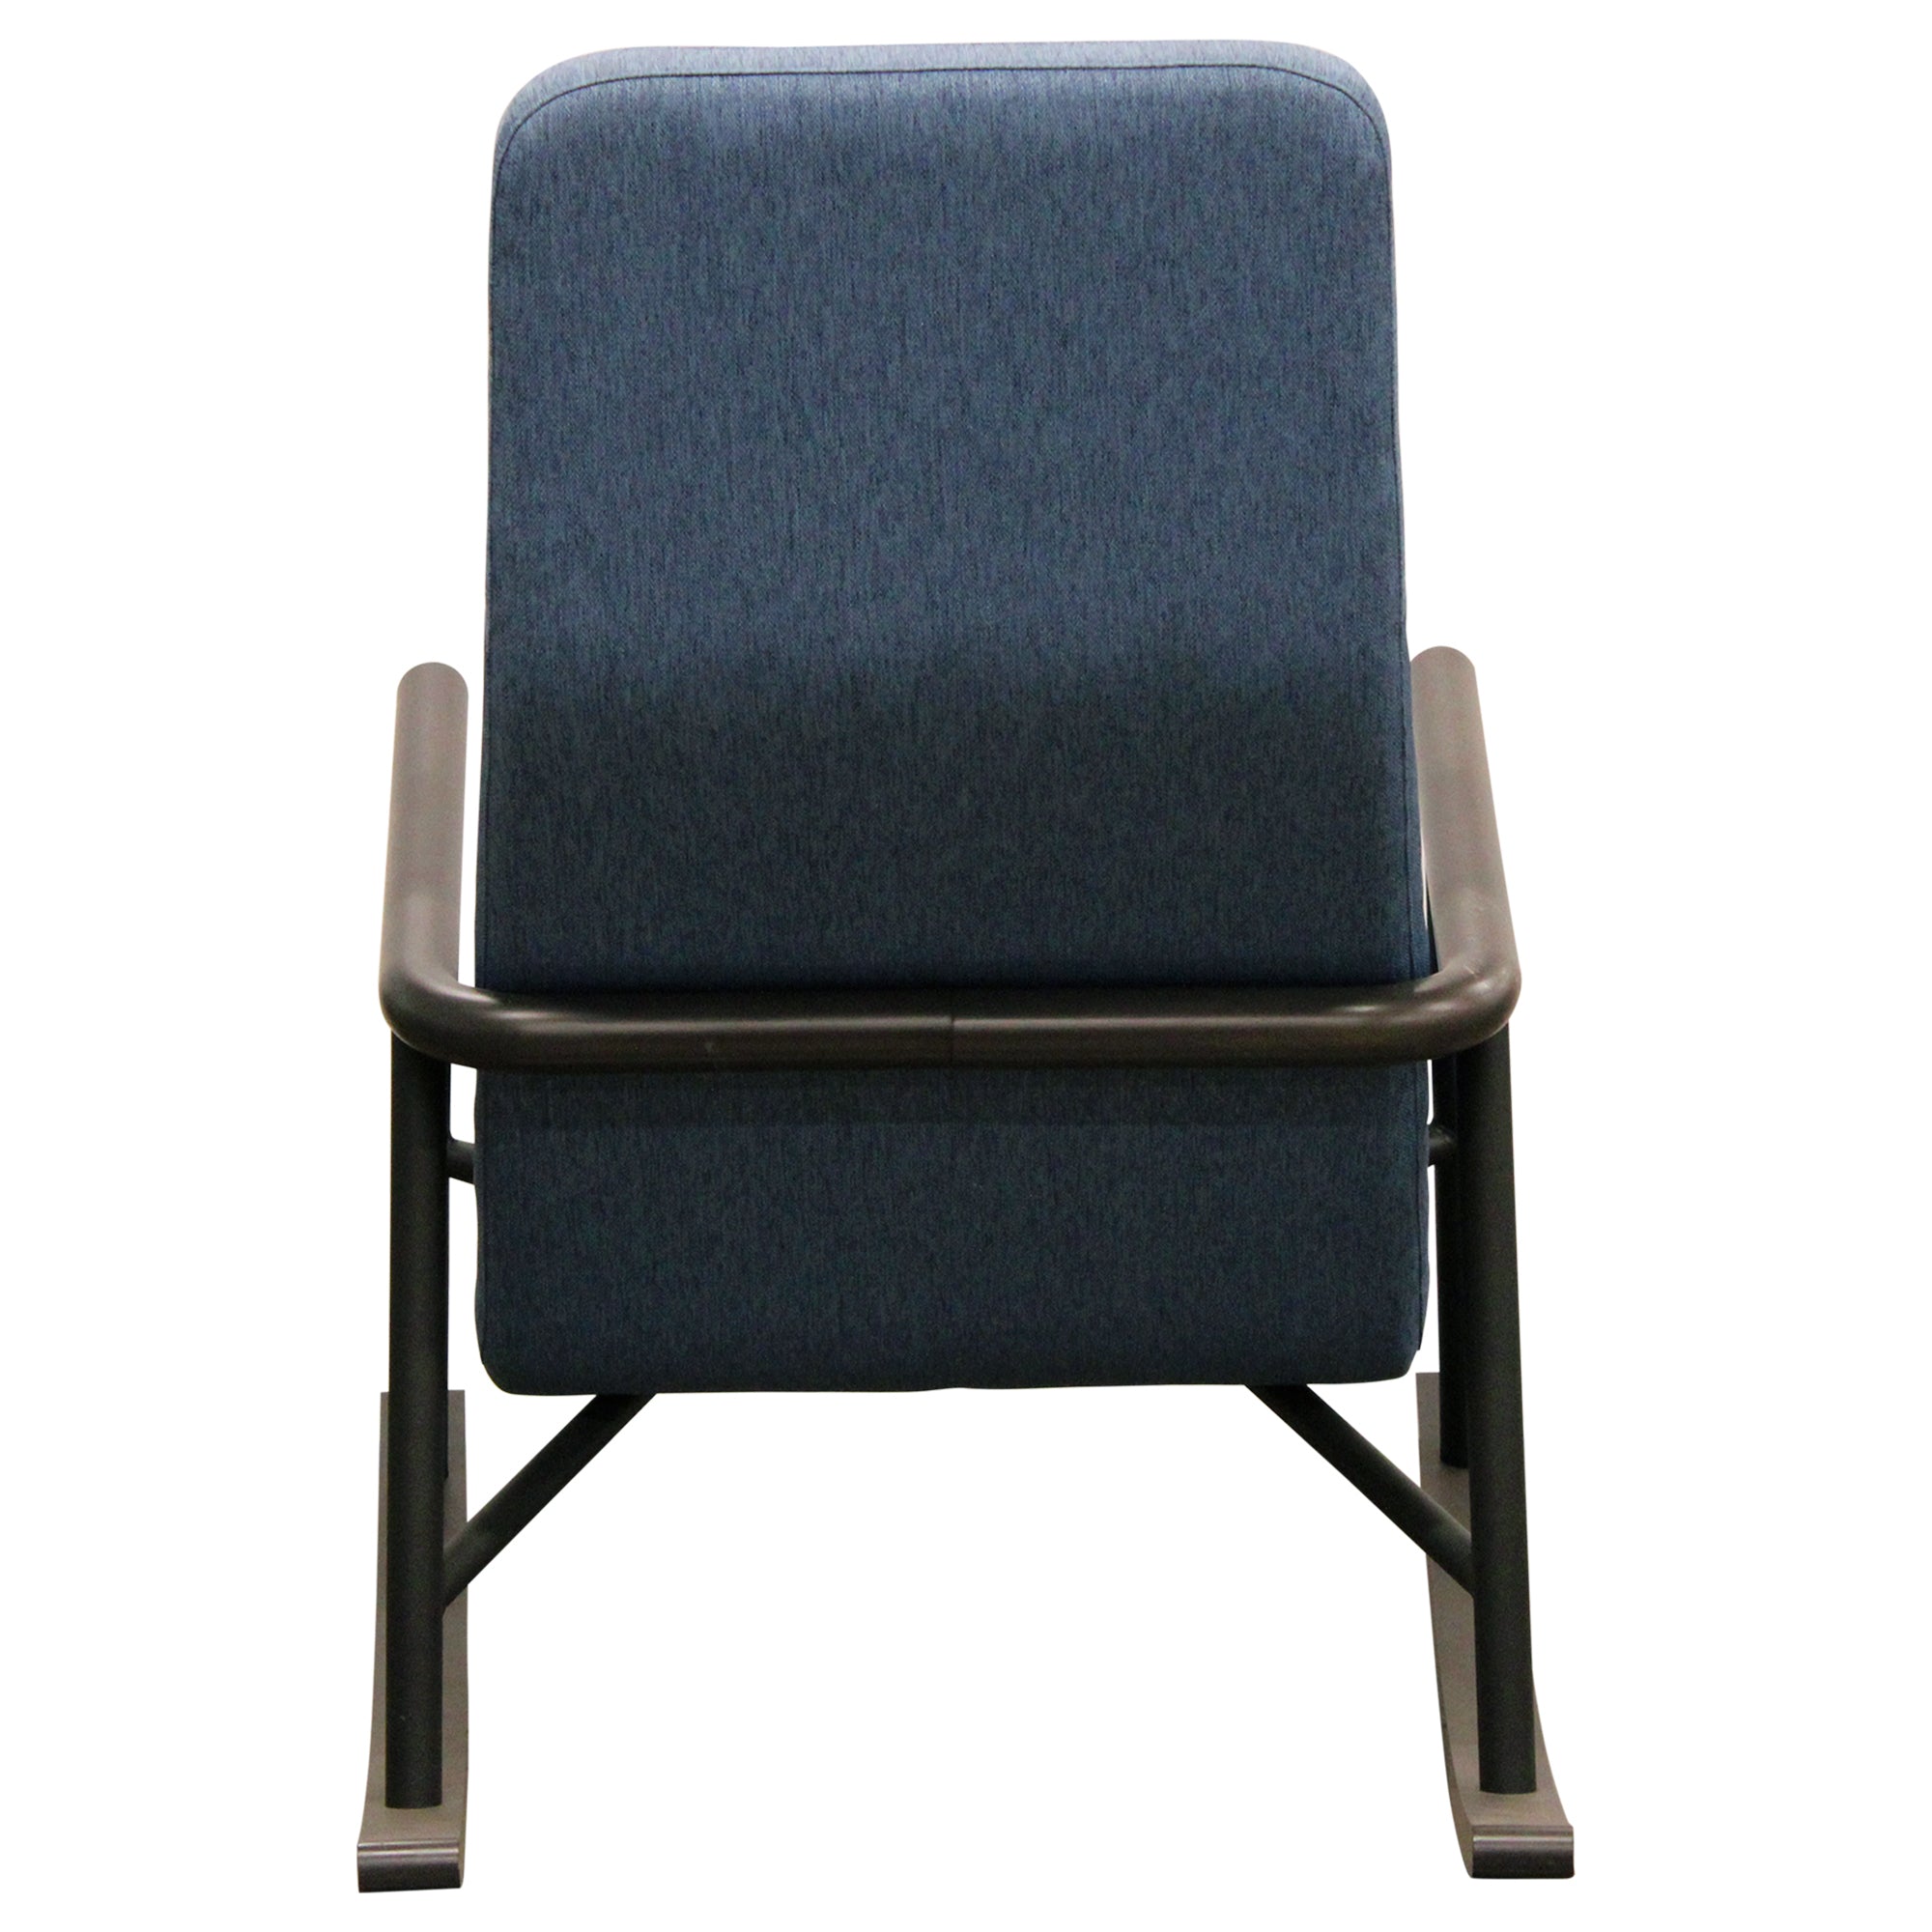 Teknion Routes Rocking Chair, Blue - Preowned